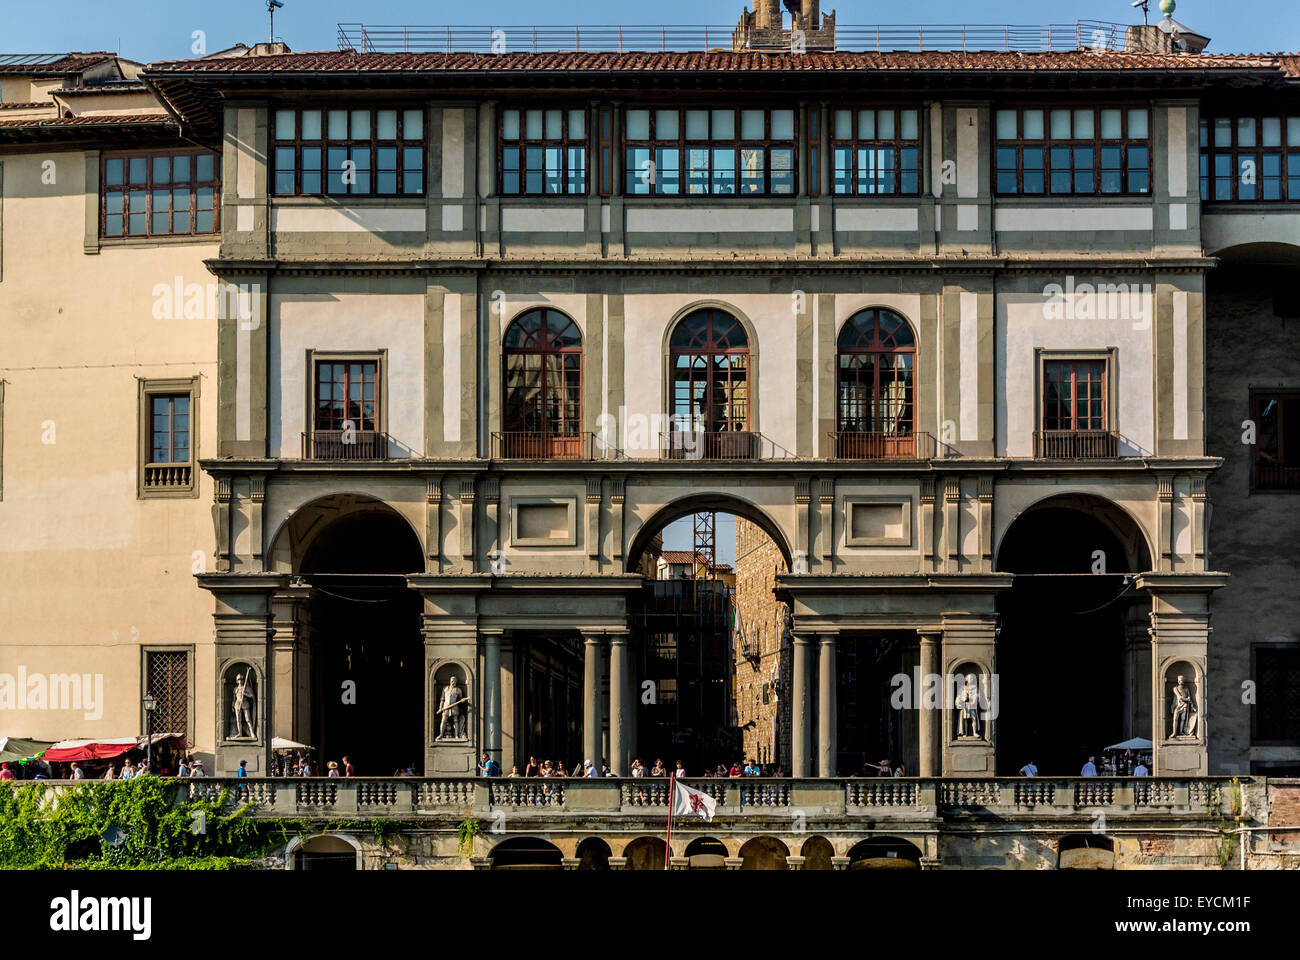 Uffizi Gallery seen from the River Arno, Florence, Italy. Stock Photo